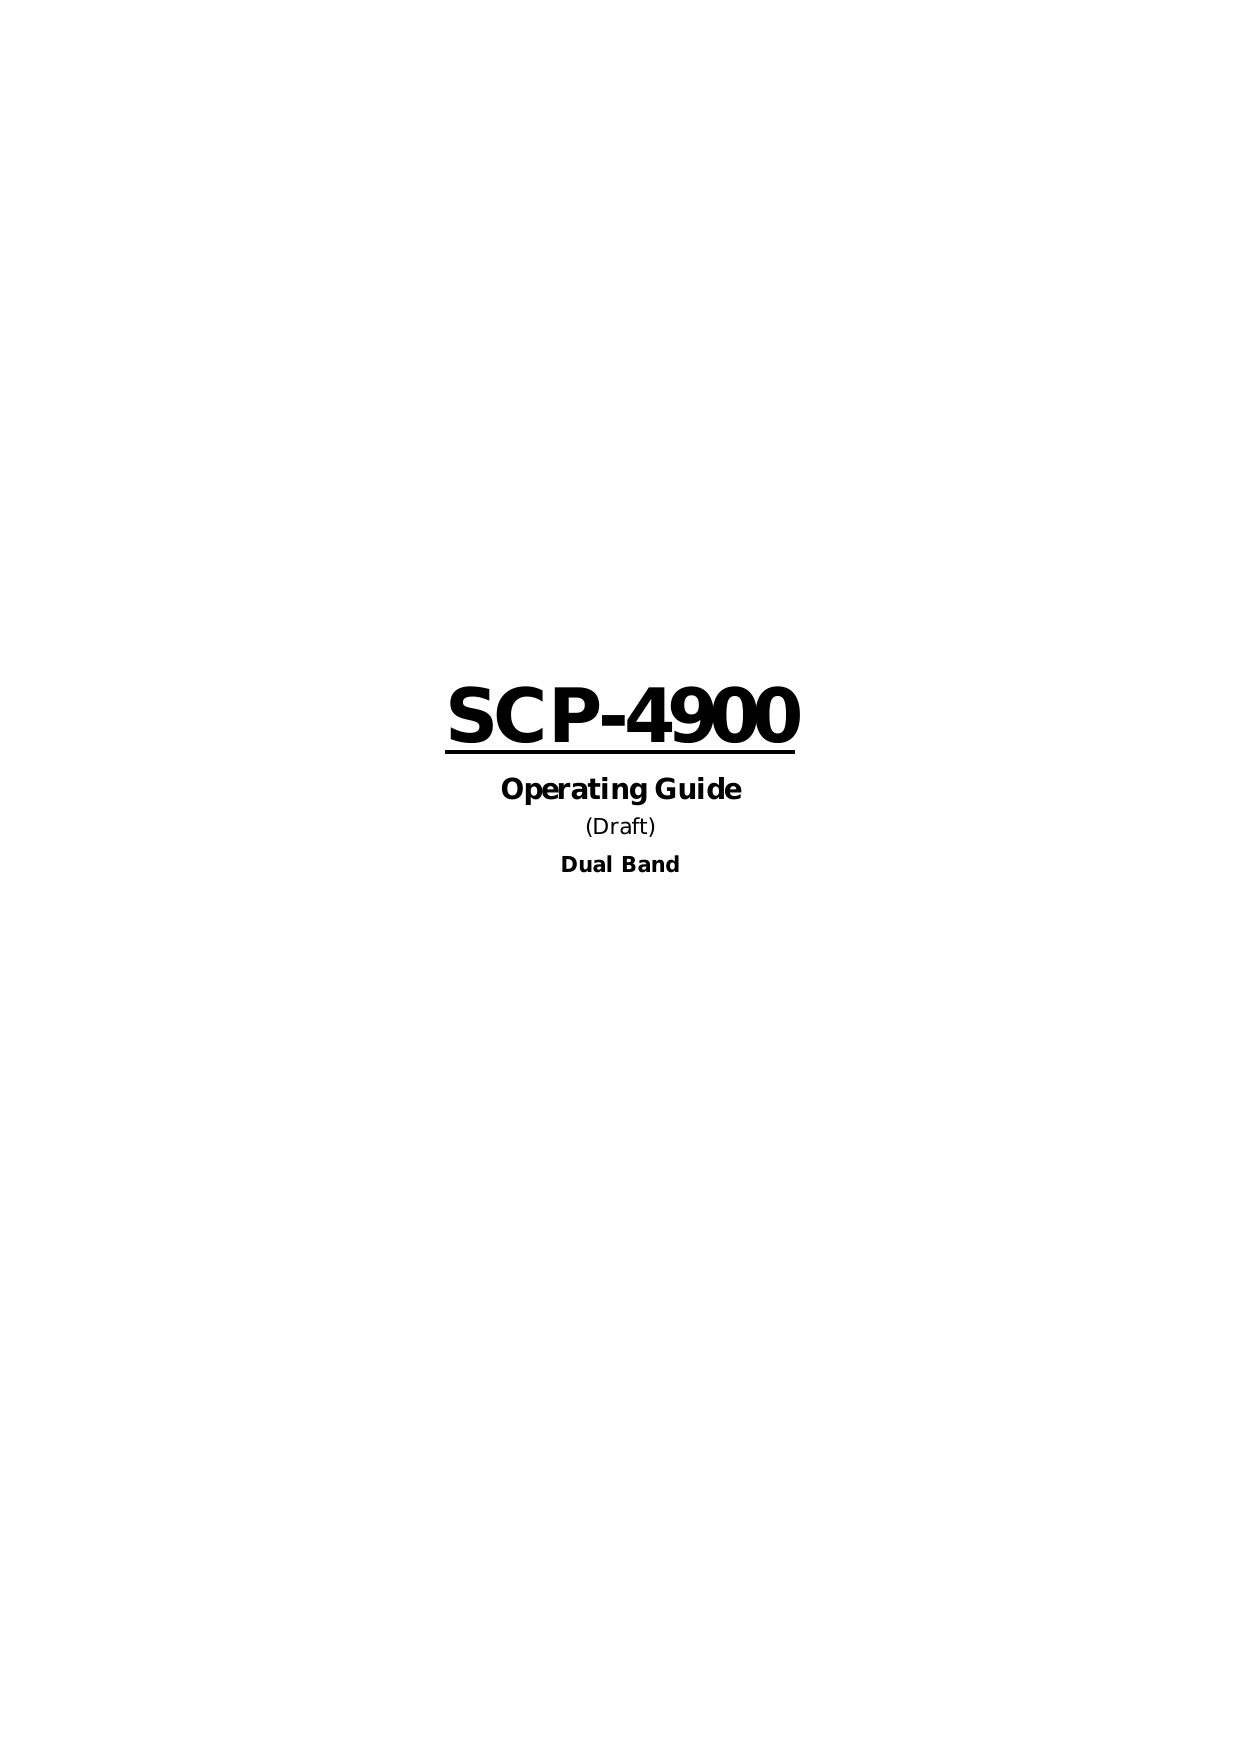             SCP-4900 Operating Guide (Draft) Dual Band   